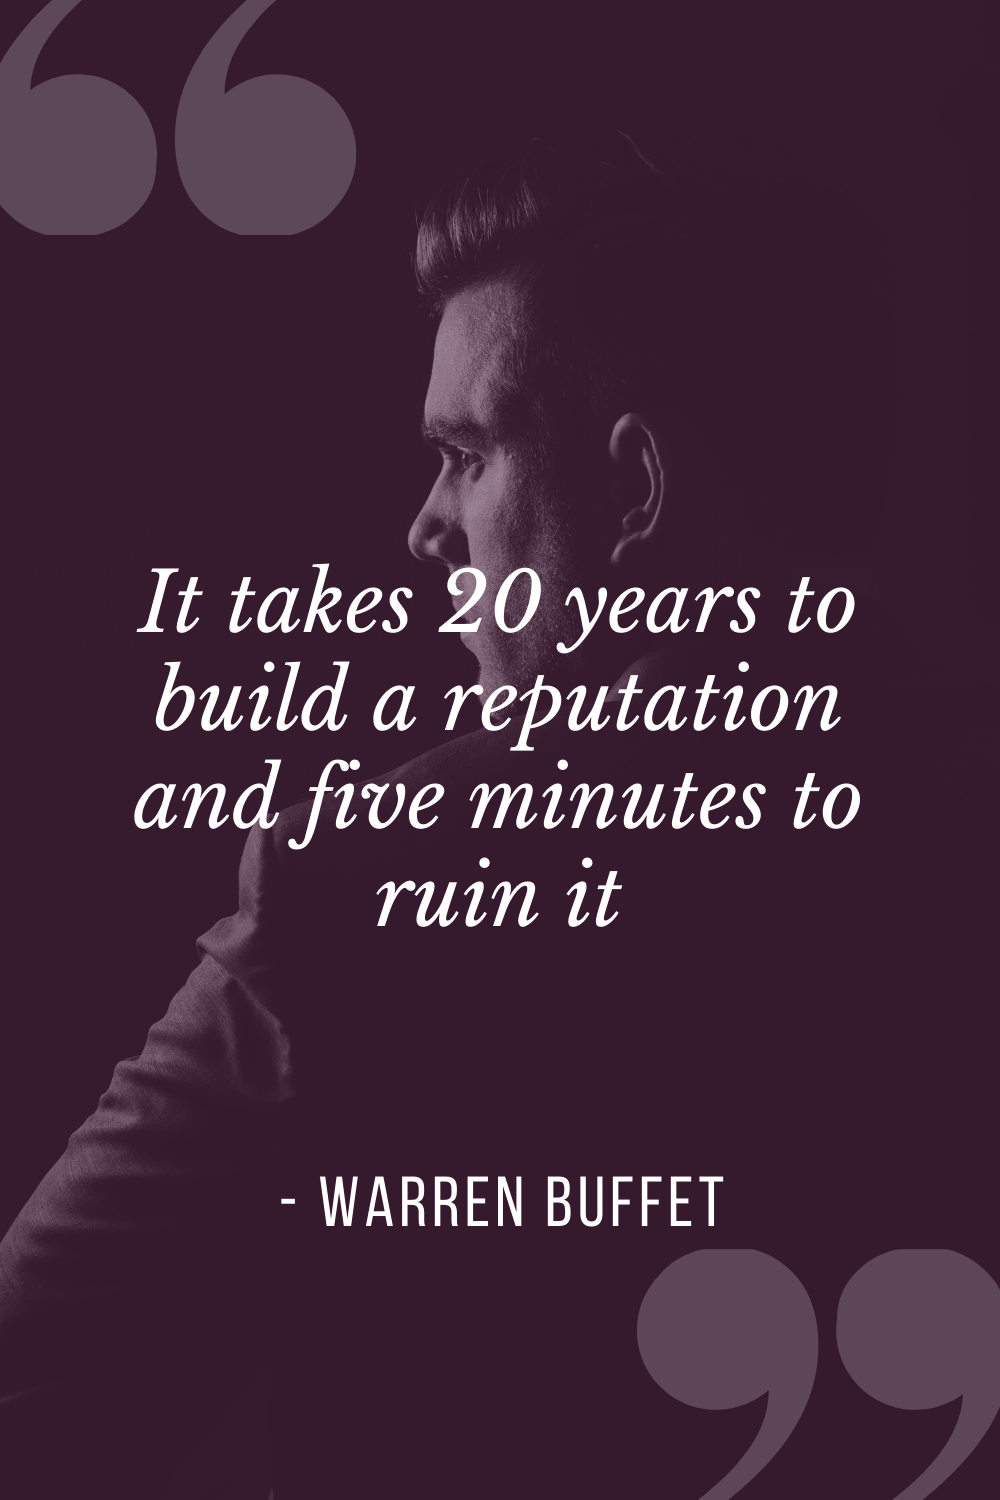 “It takes 20 years to build a reputation and five minutes to ruin it”, Warren Buffet